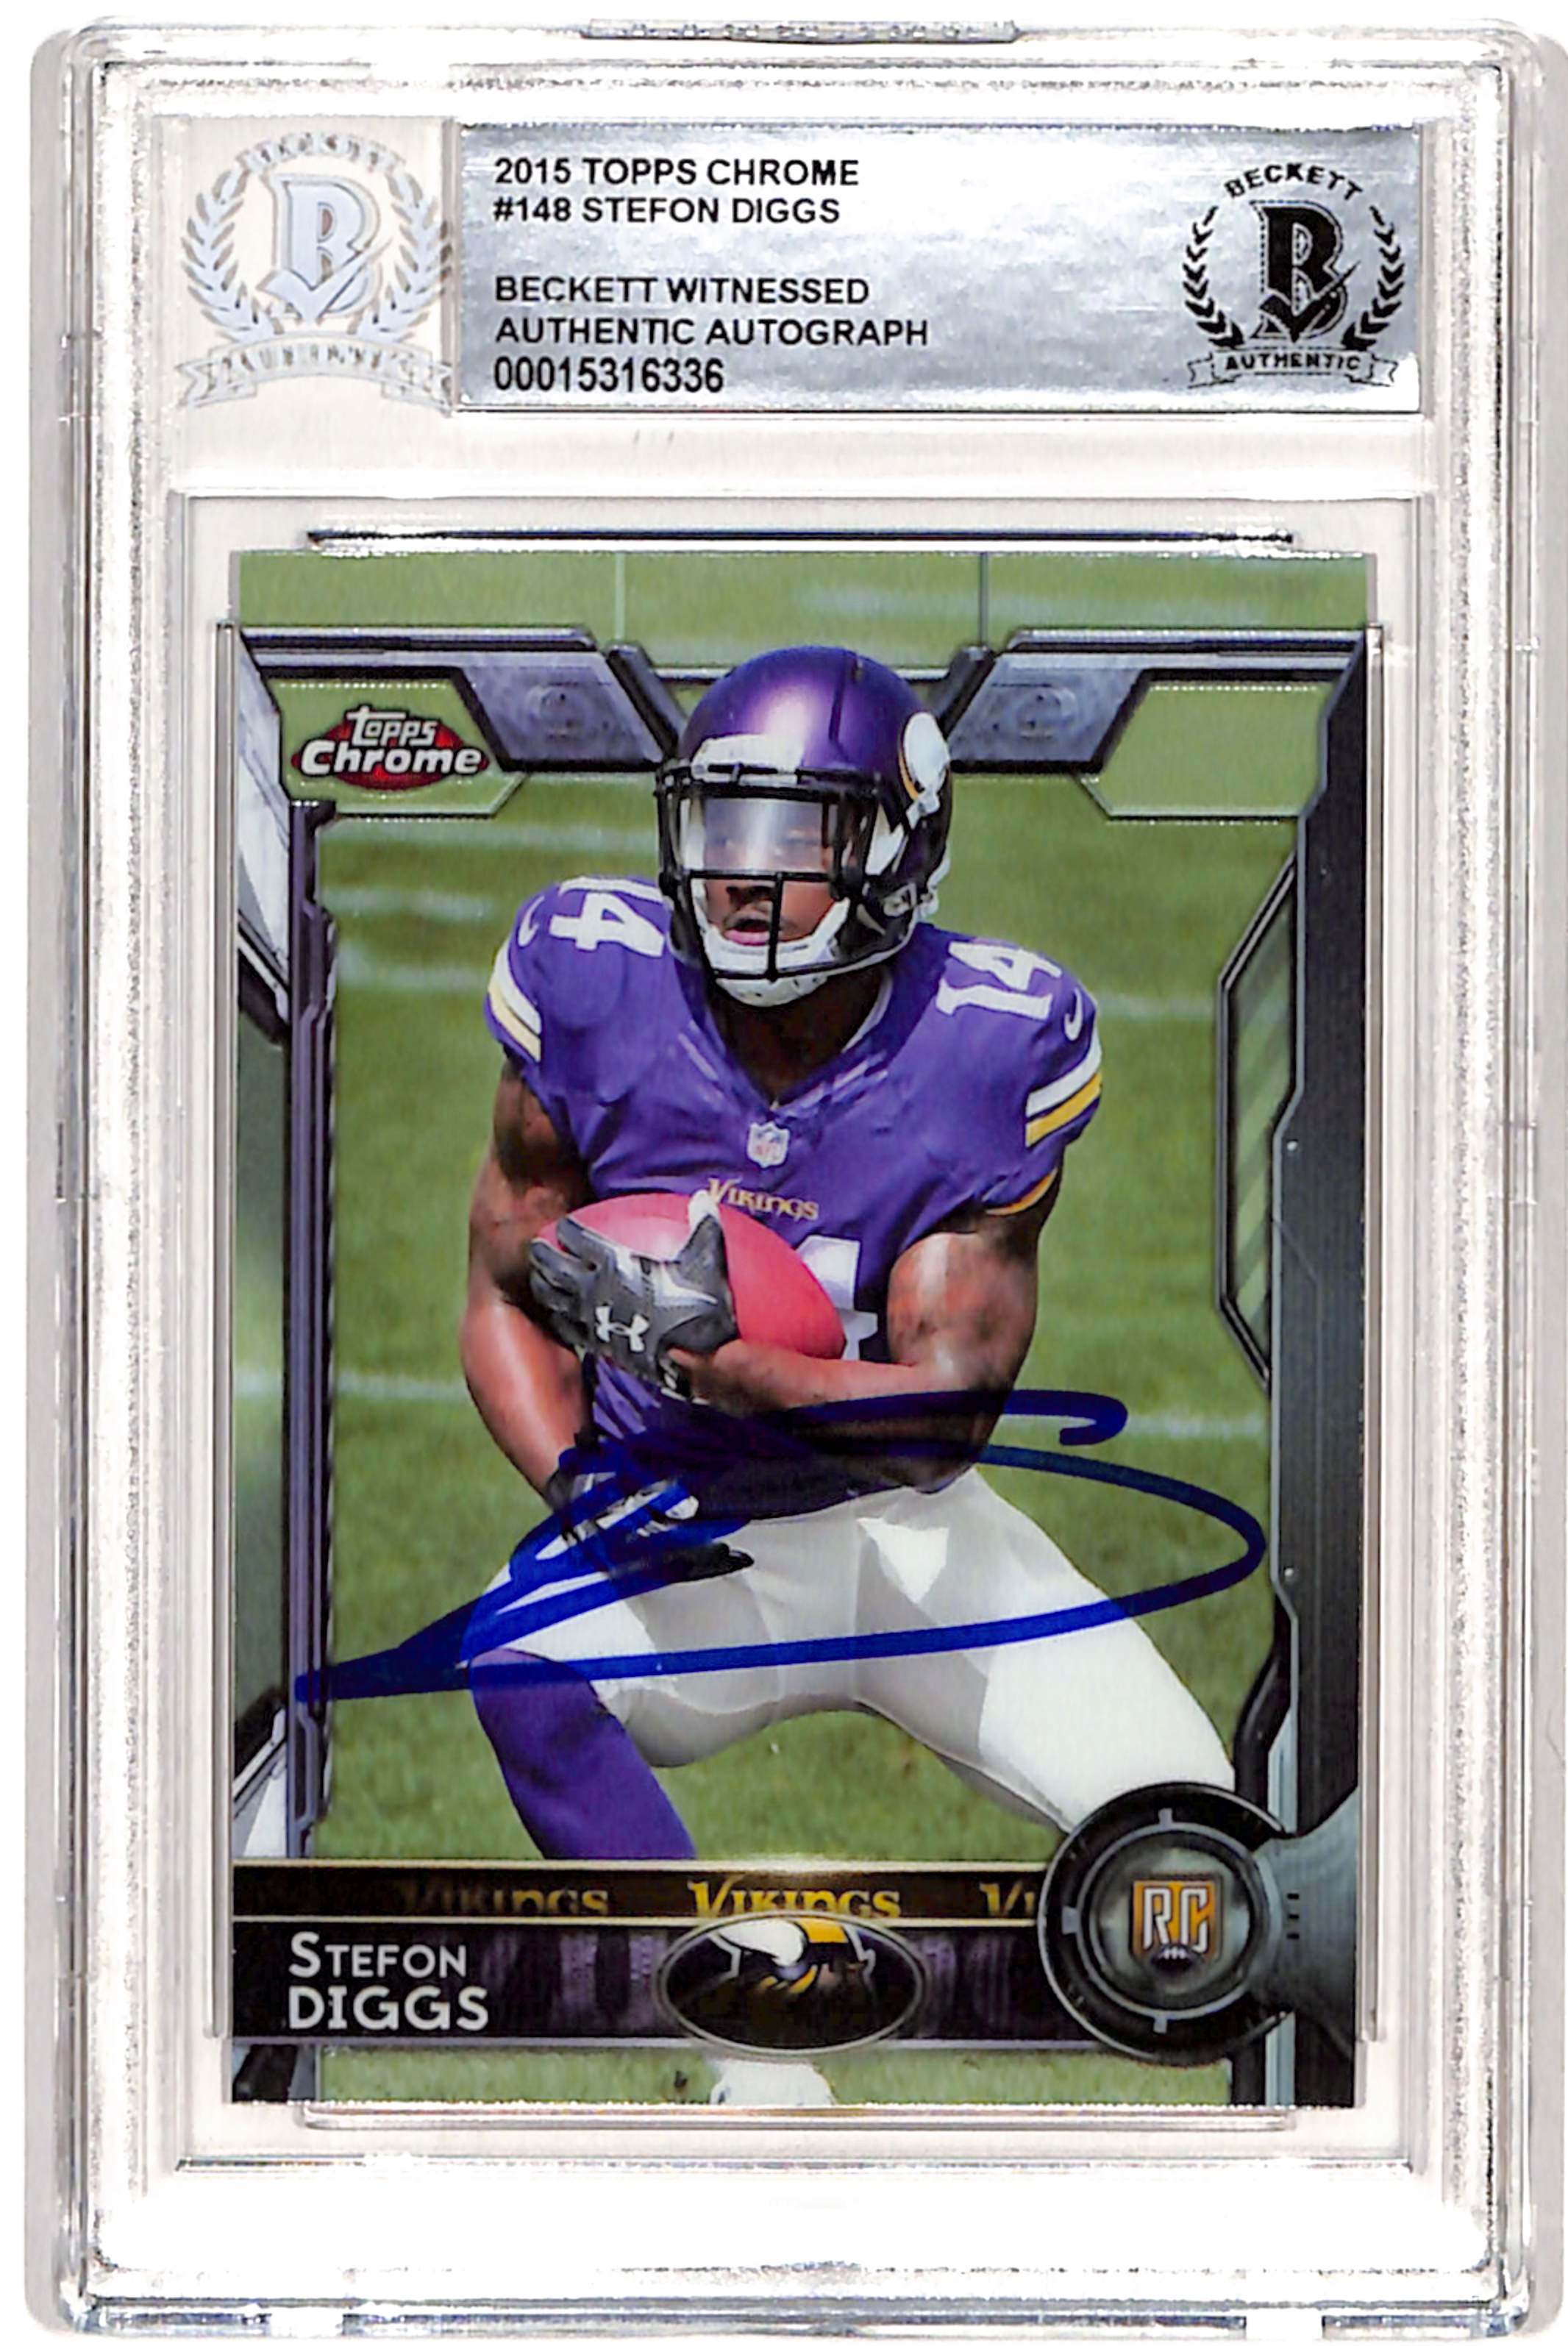 Stefon Diggs Signed 2015 Topps Chrome #148 Trading Card Beckett